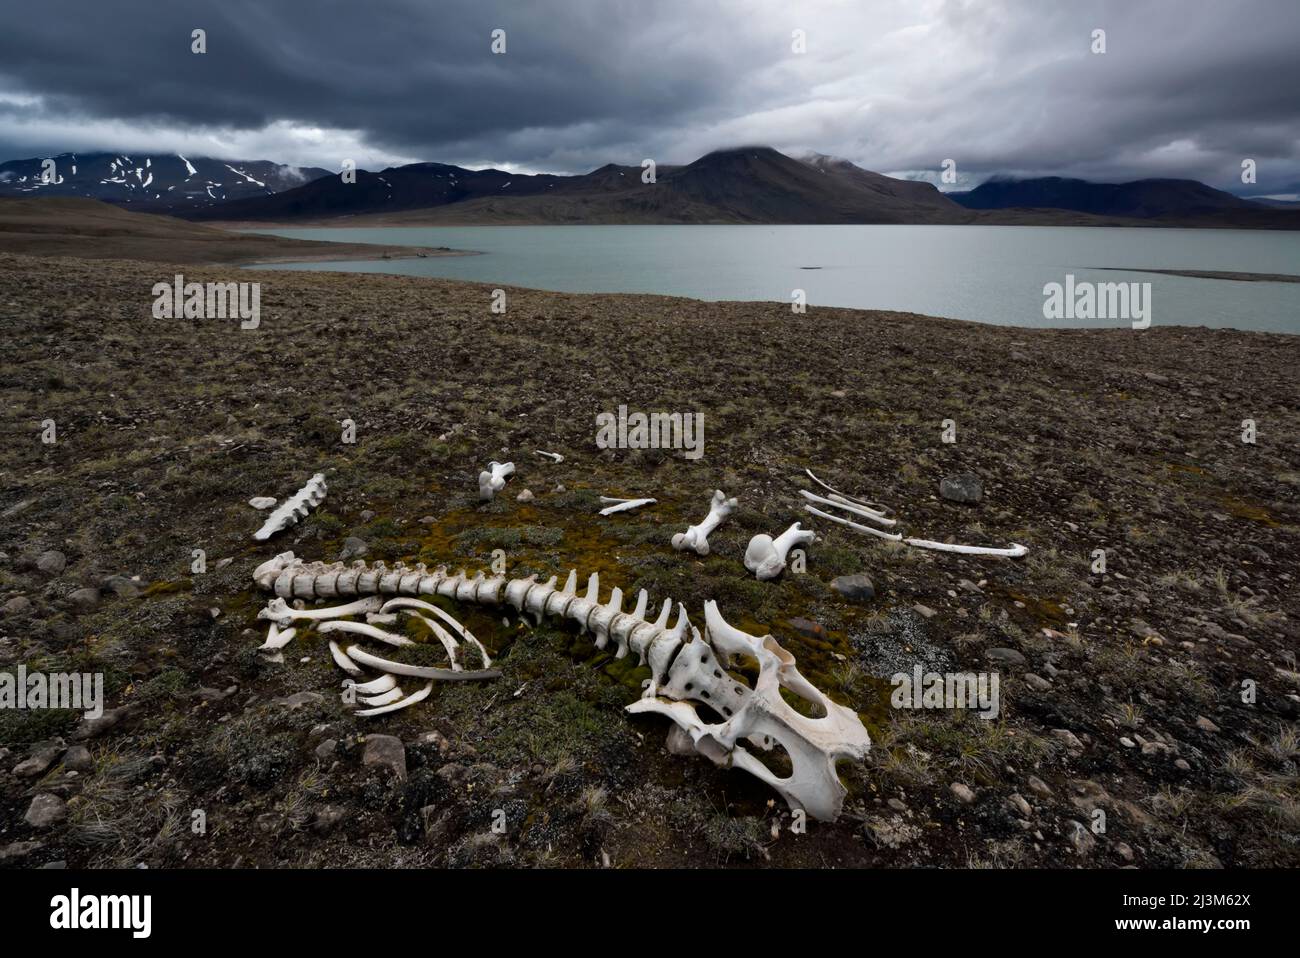 Skeleton of a musk ox on the shore of Cerum So Lake.; Greenland. Stock Photo